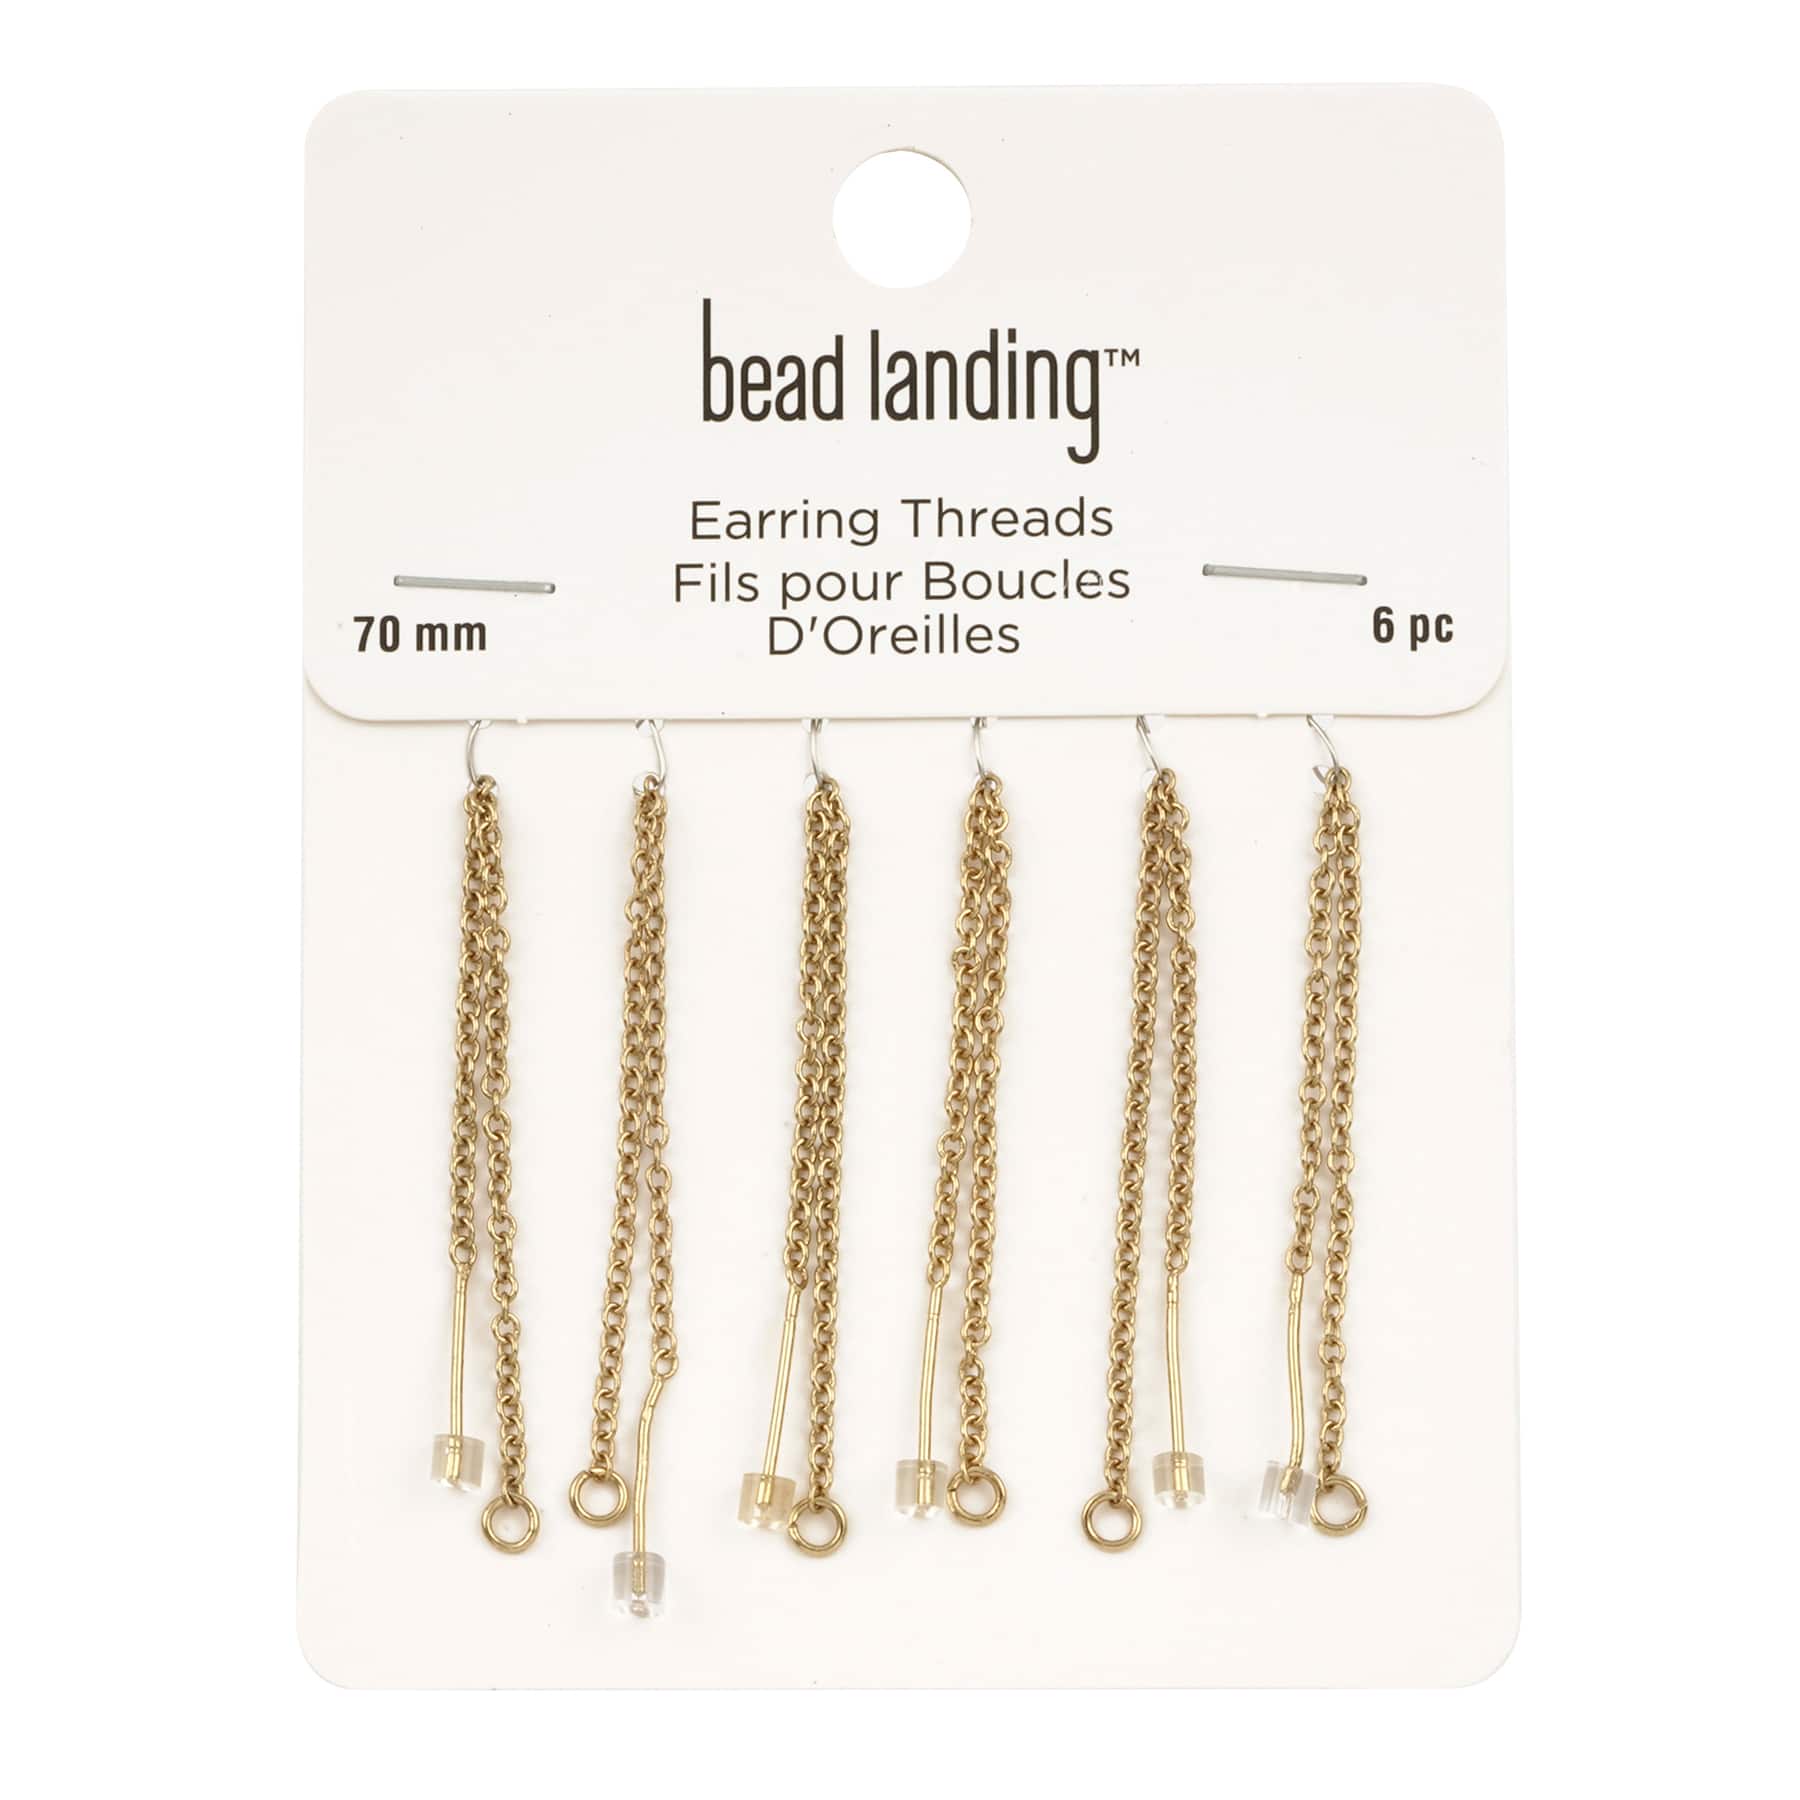 12 Packs: 6 ct. (72 total) 70mm Gold Earring Threads with Rings by Bead Landing&#x2122;